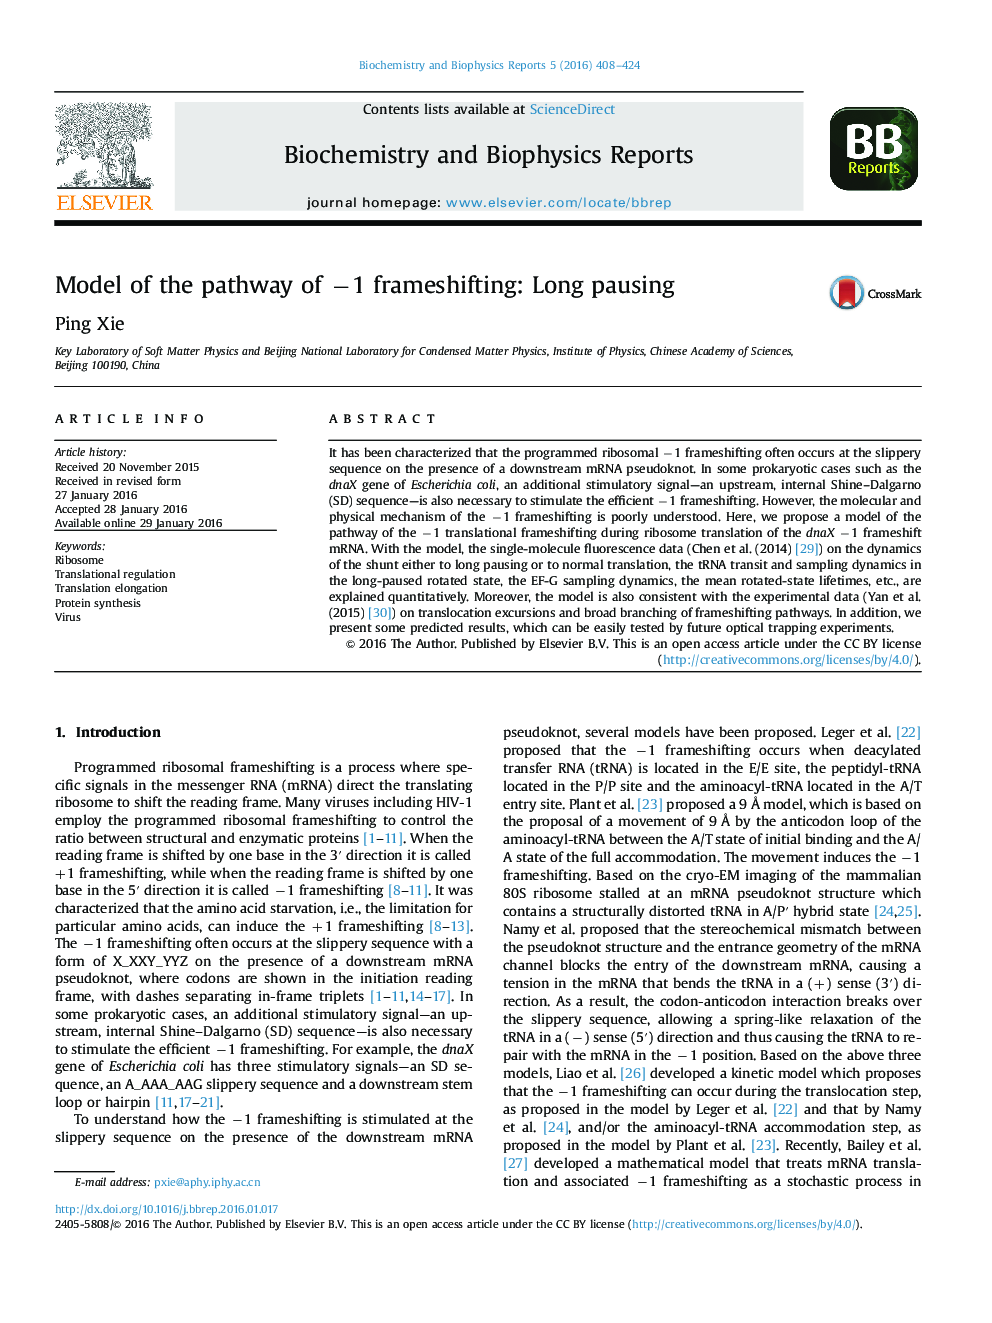 Model of the pathway of â1 frameshifting: Long pausing